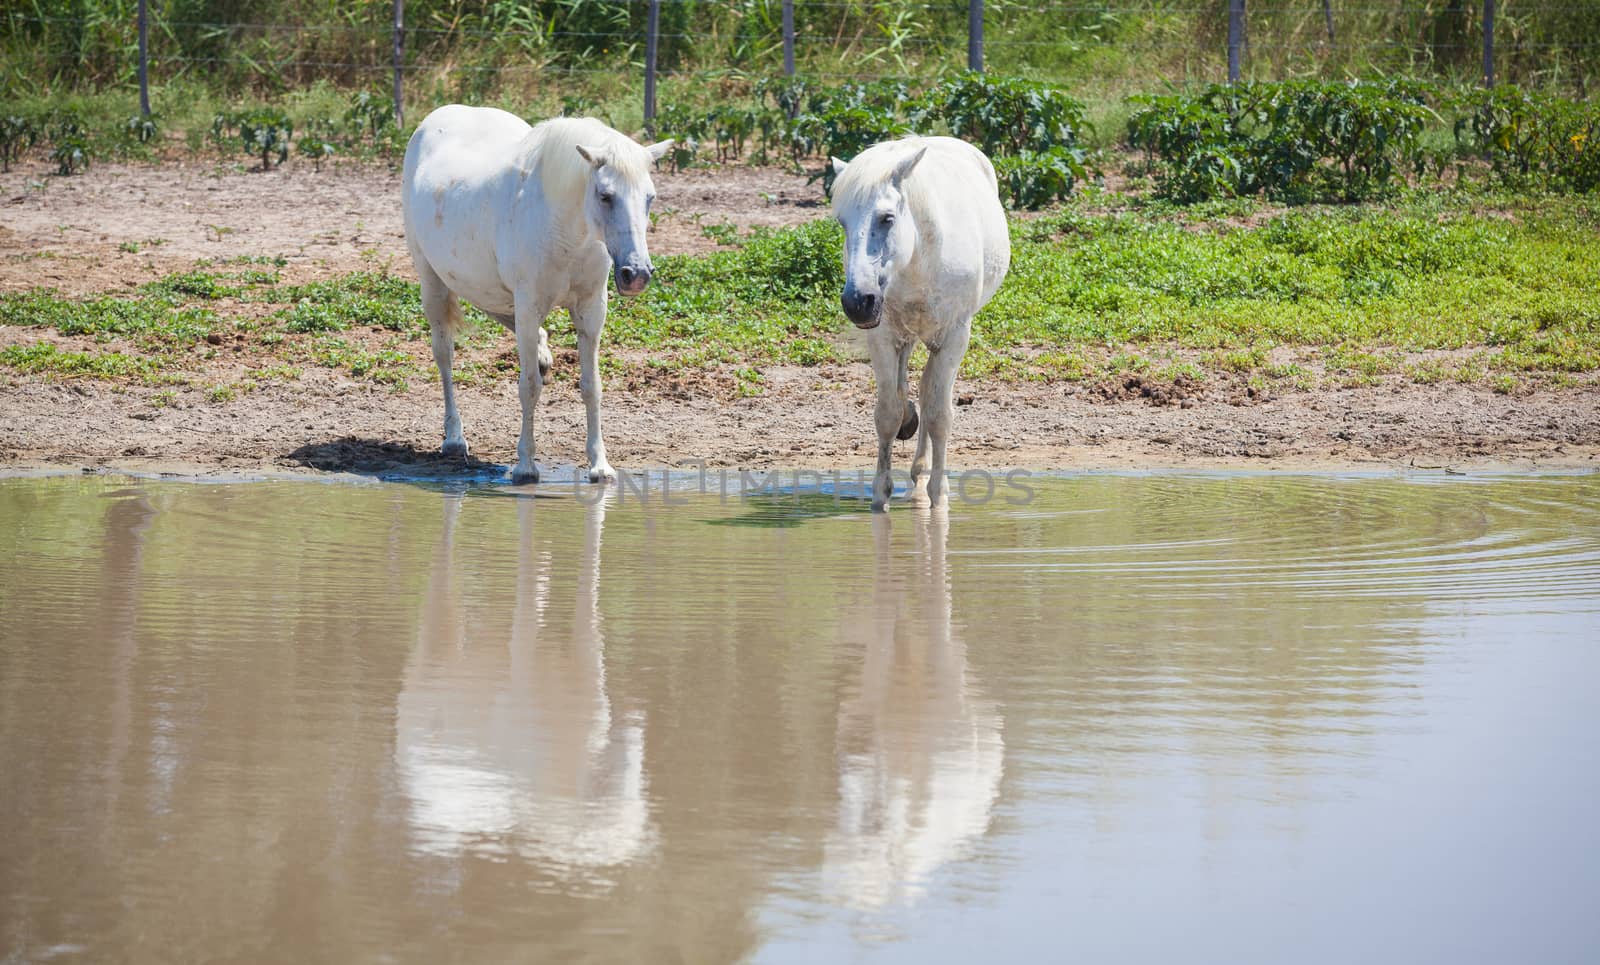 The famous horses  of the Camargue in France